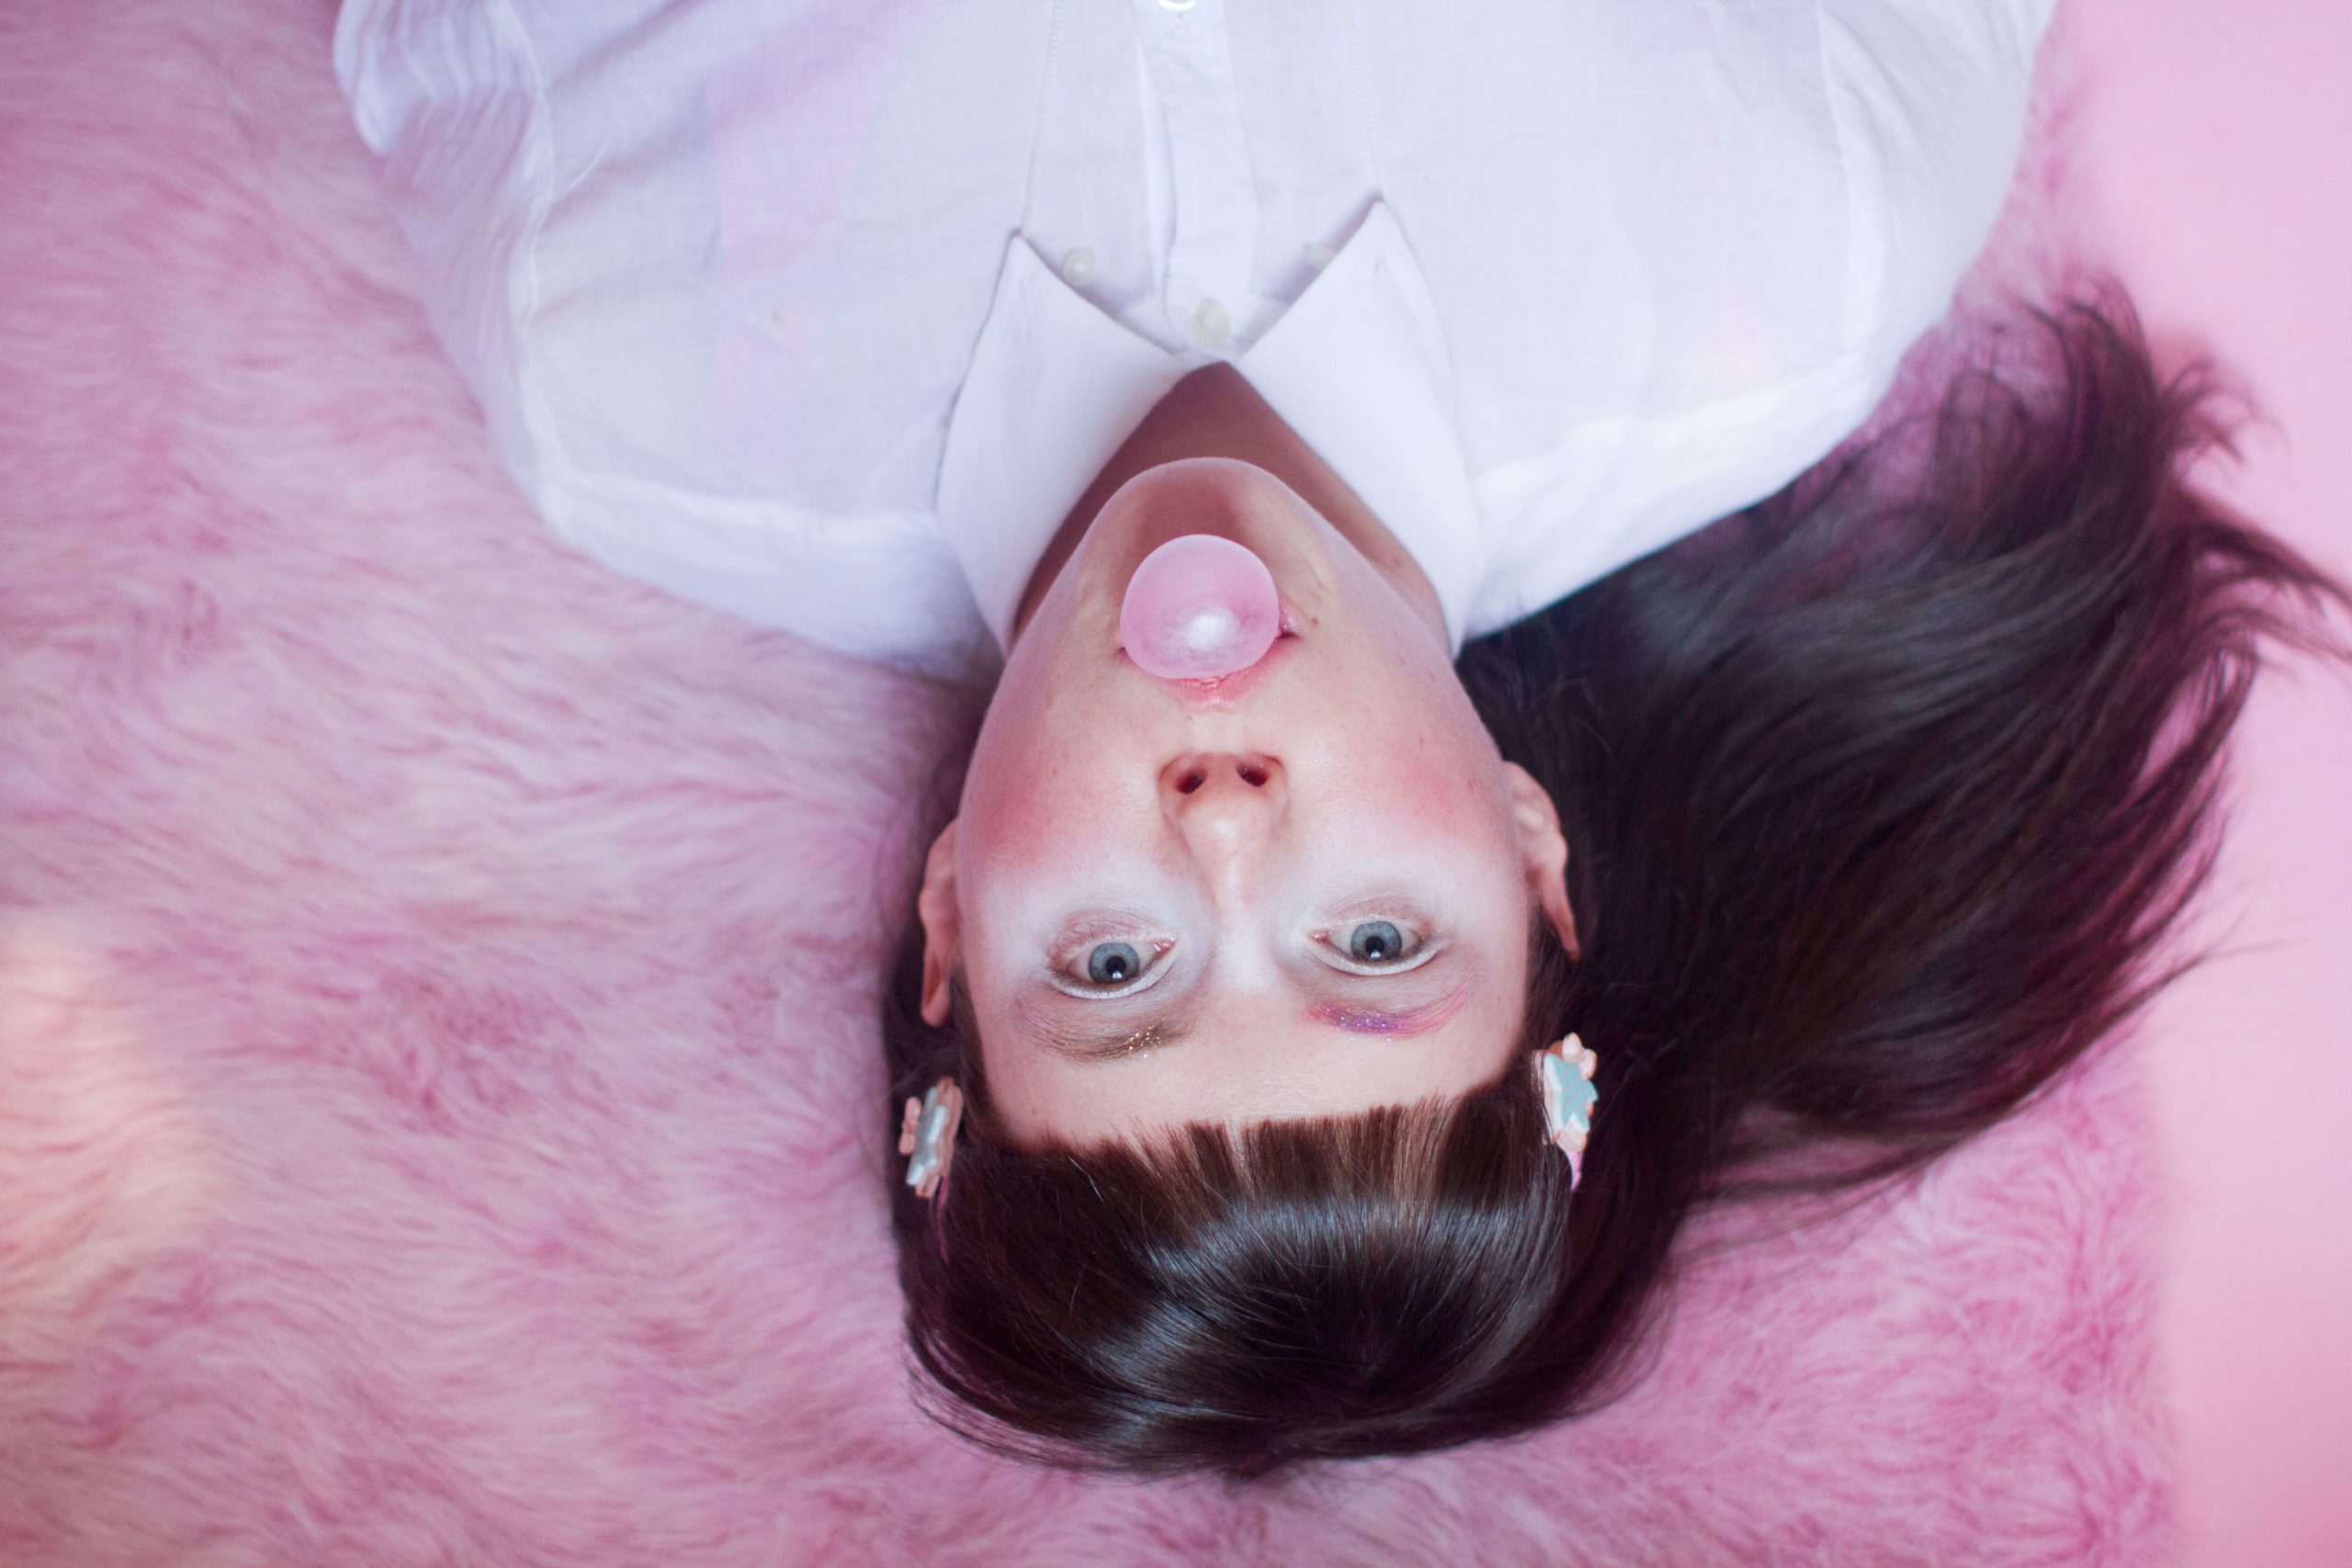 Elena Eli Belyea lays on their back in a white collared shirt, staring directly into the camera. Pictured from the sternum up, they lay on a light pink faux-fur rug, blowing bubbles with pink gum as they look back at the viewer. Their long dark hair is clipped back with light blue and pink star-shaped barettes, and swept out to their left behind them.